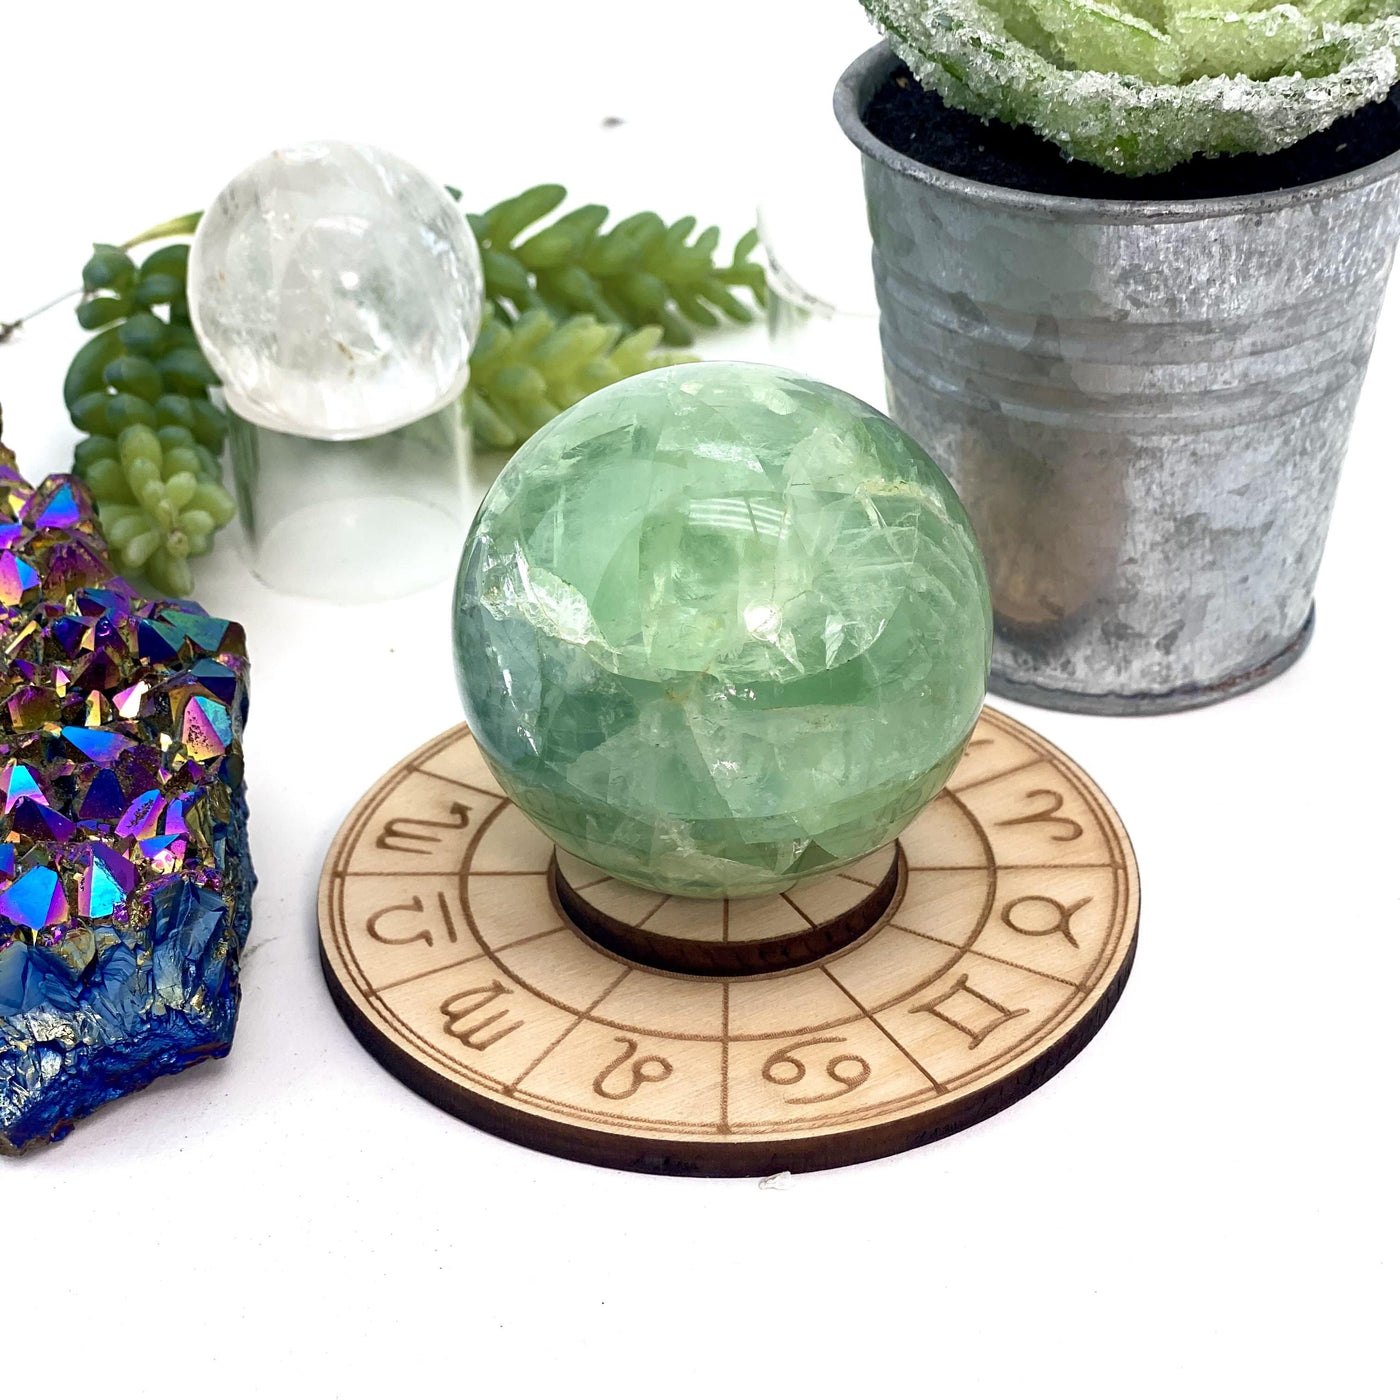 Wooden sphere stand with zodiac symbols.  PIctured with a green fluorite sphere on it.